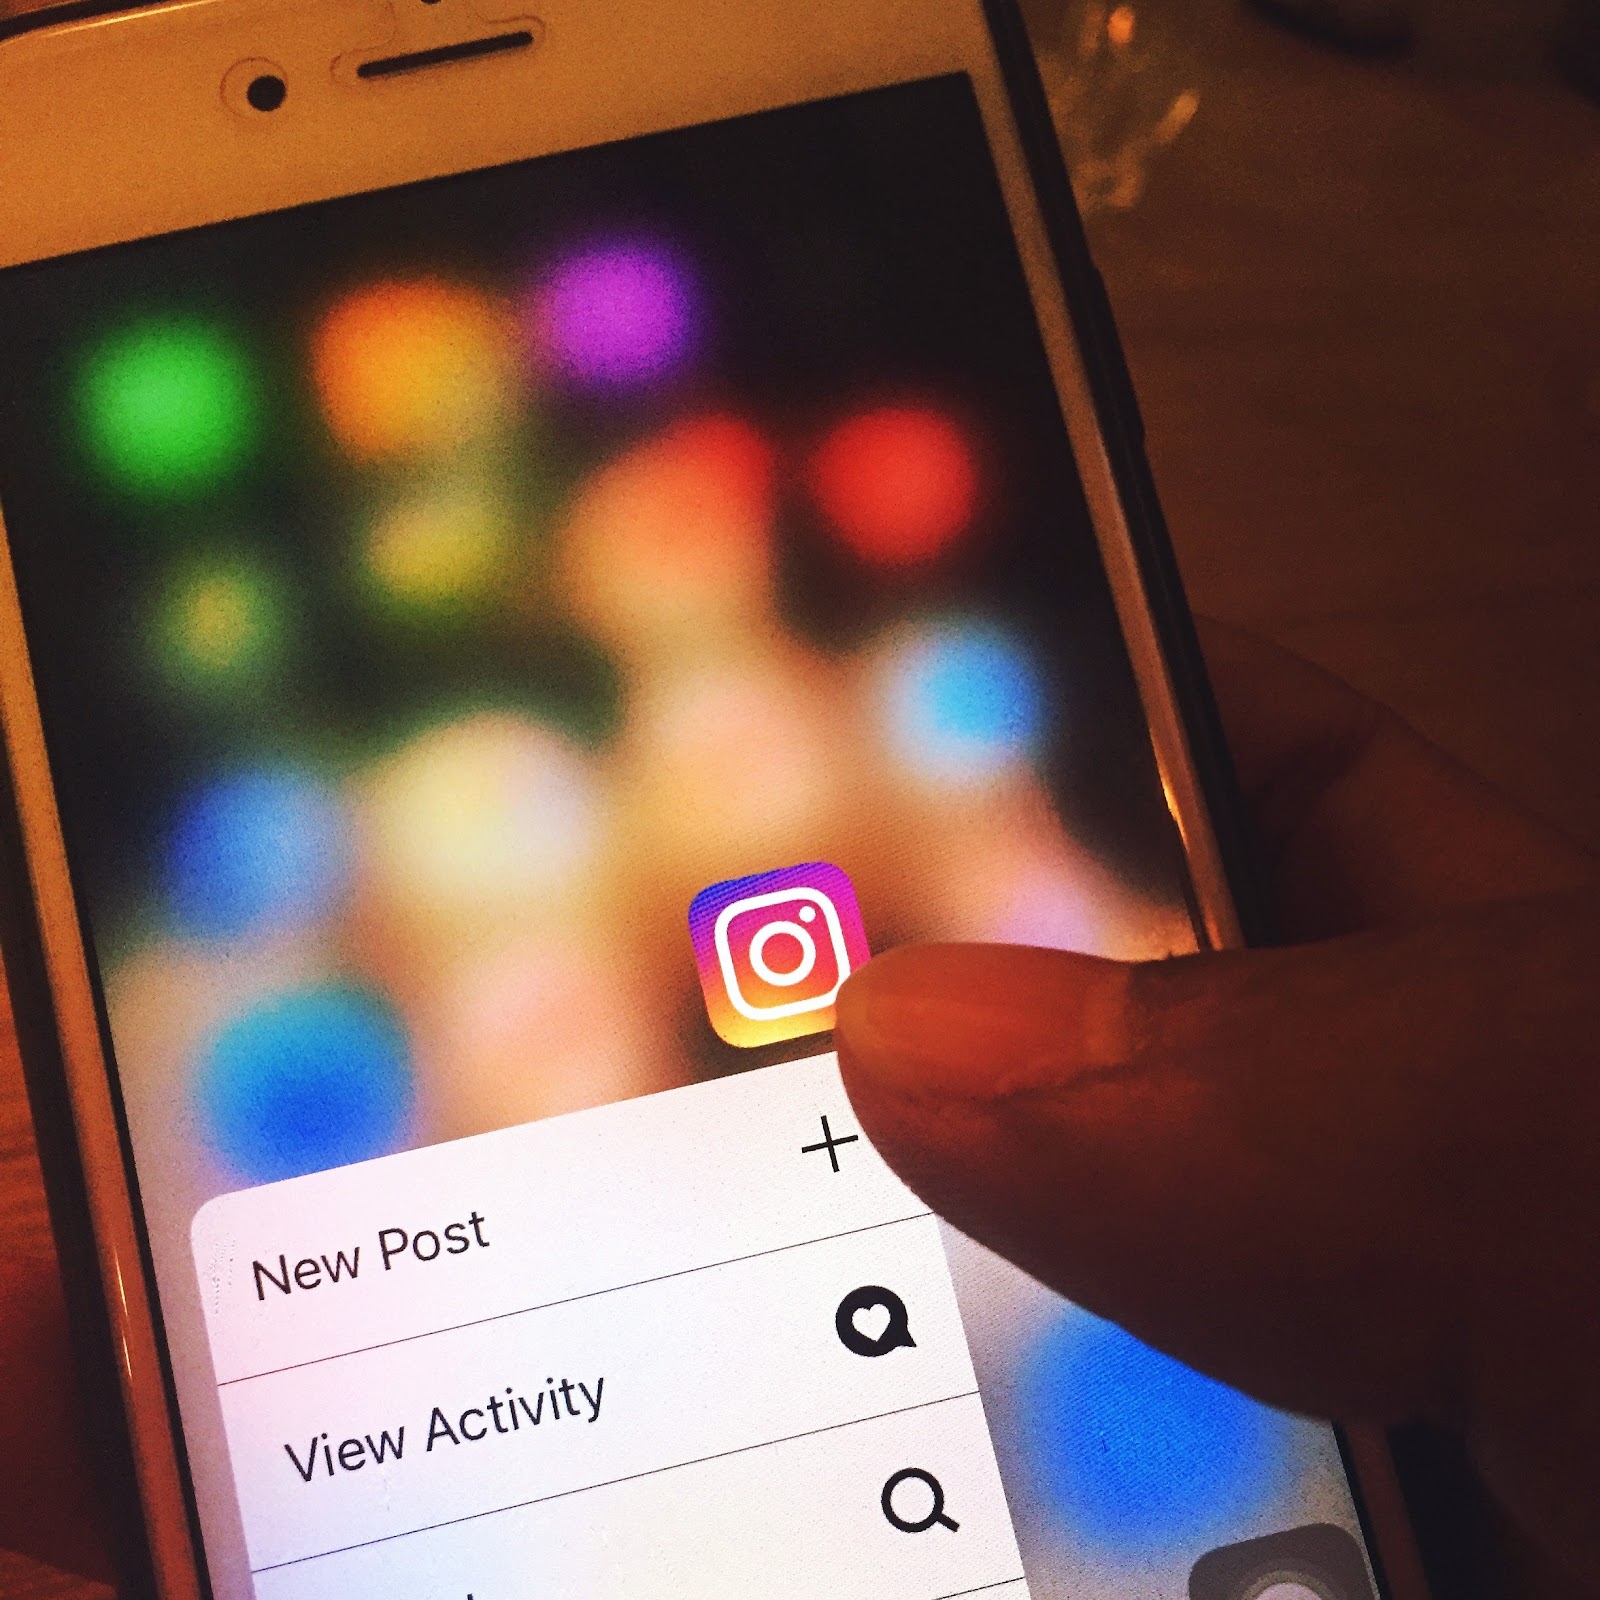 Top 9 sites to promote your contents in 2021 to get required Results: Instagram